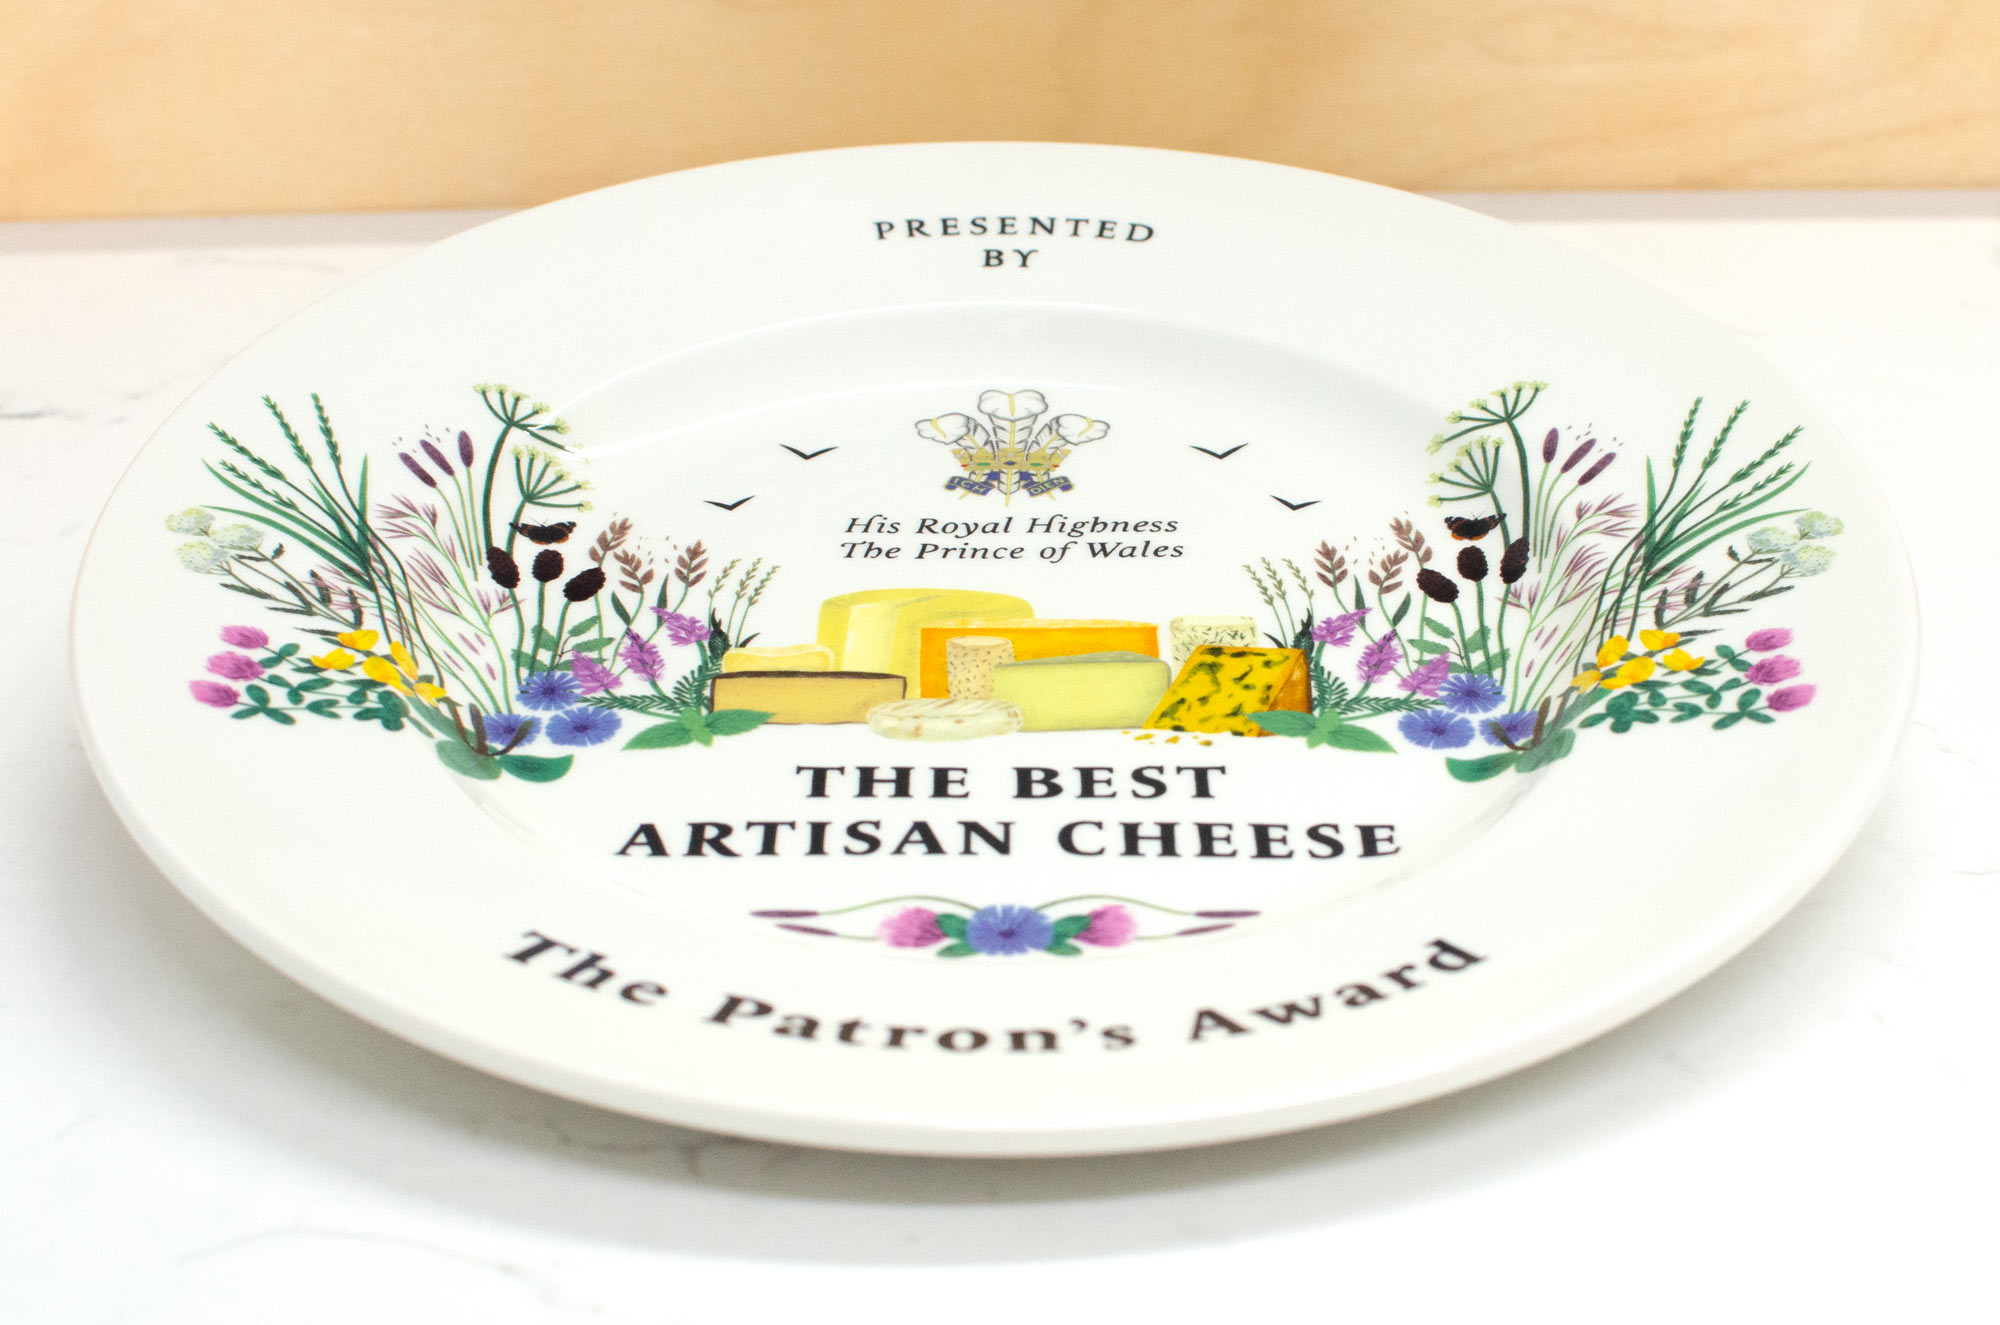 Final artwork for the Artisan Cheese Award Plate by Elly Jahnz